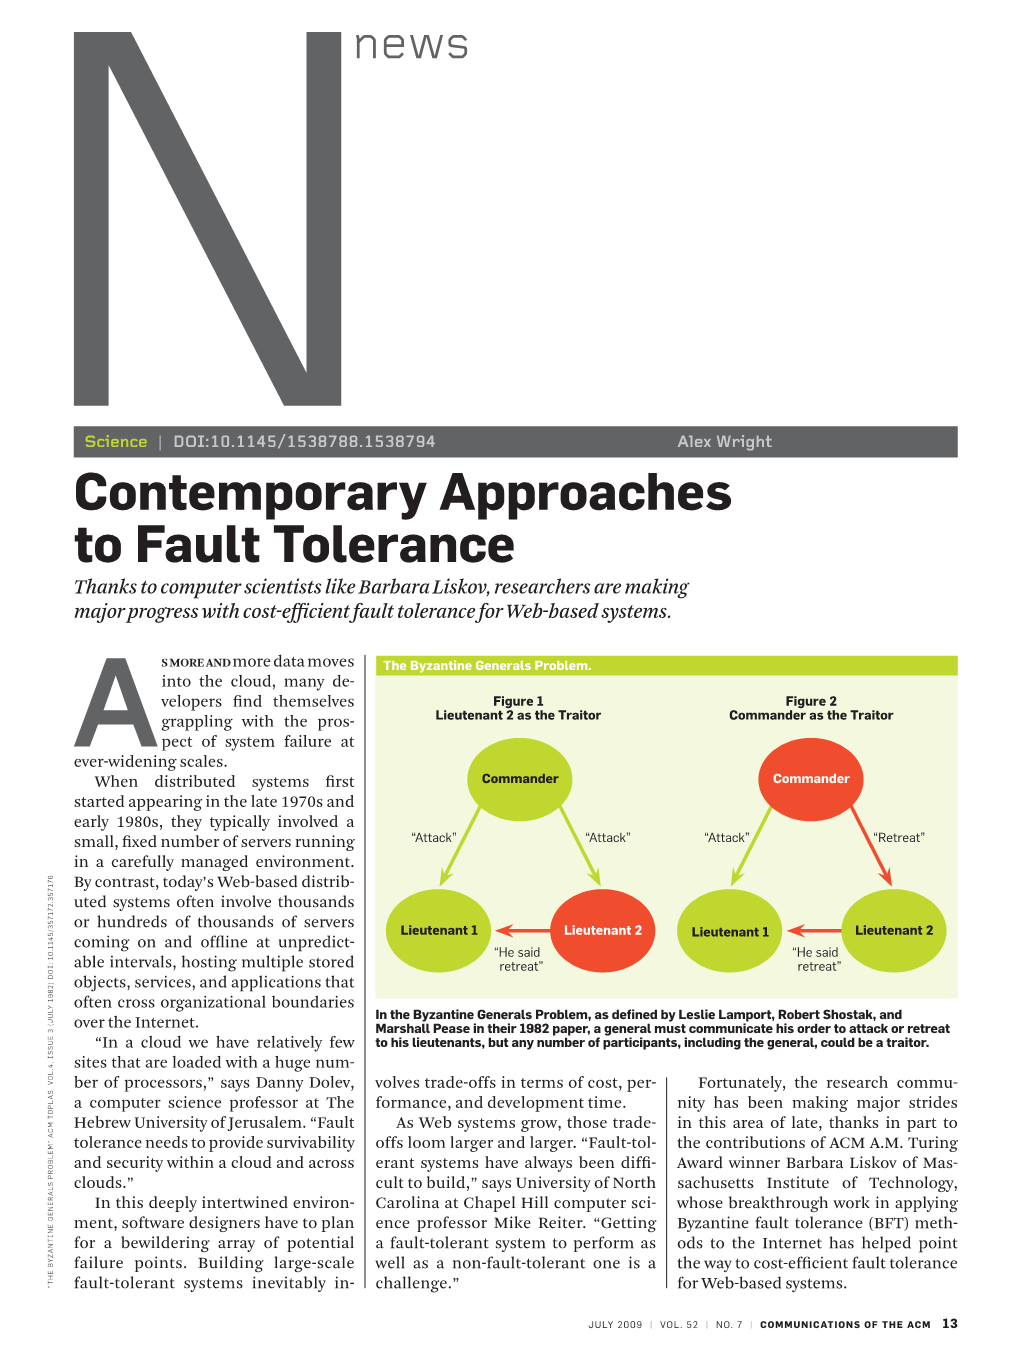 Contemporary Approaches to Fault Tolerance